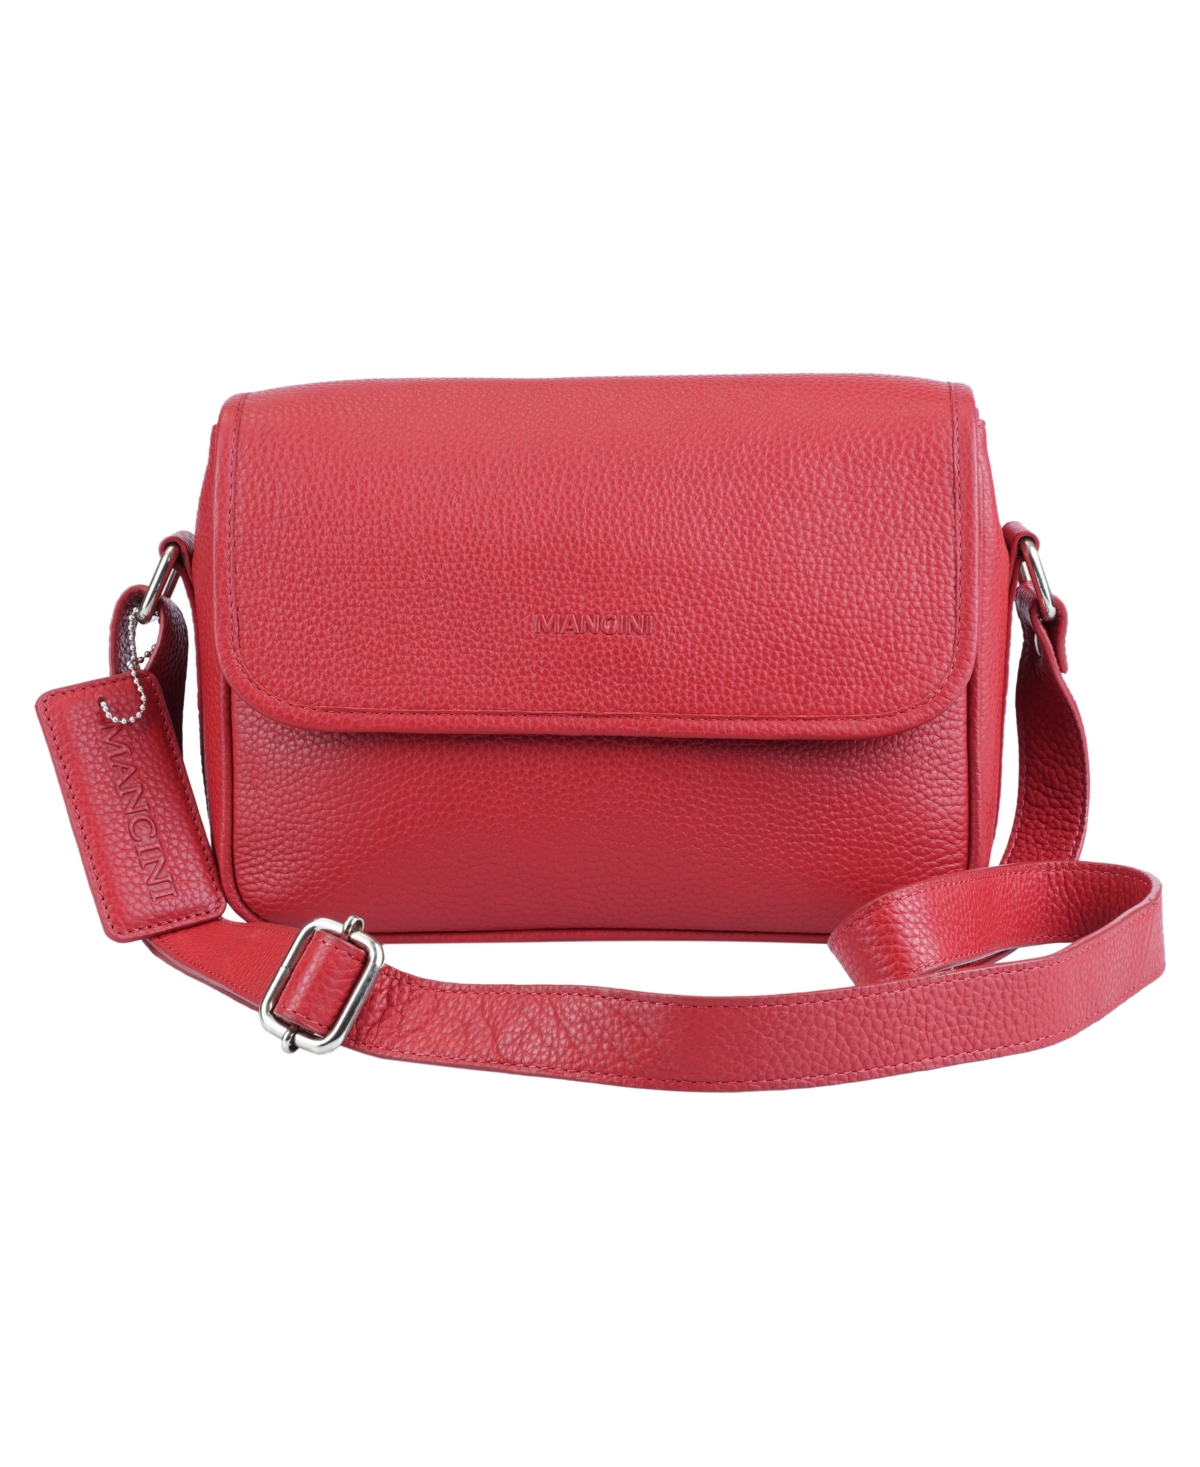 Mancini Pebbled Collection Kimberly Leather Flap Closure Handbag In Red